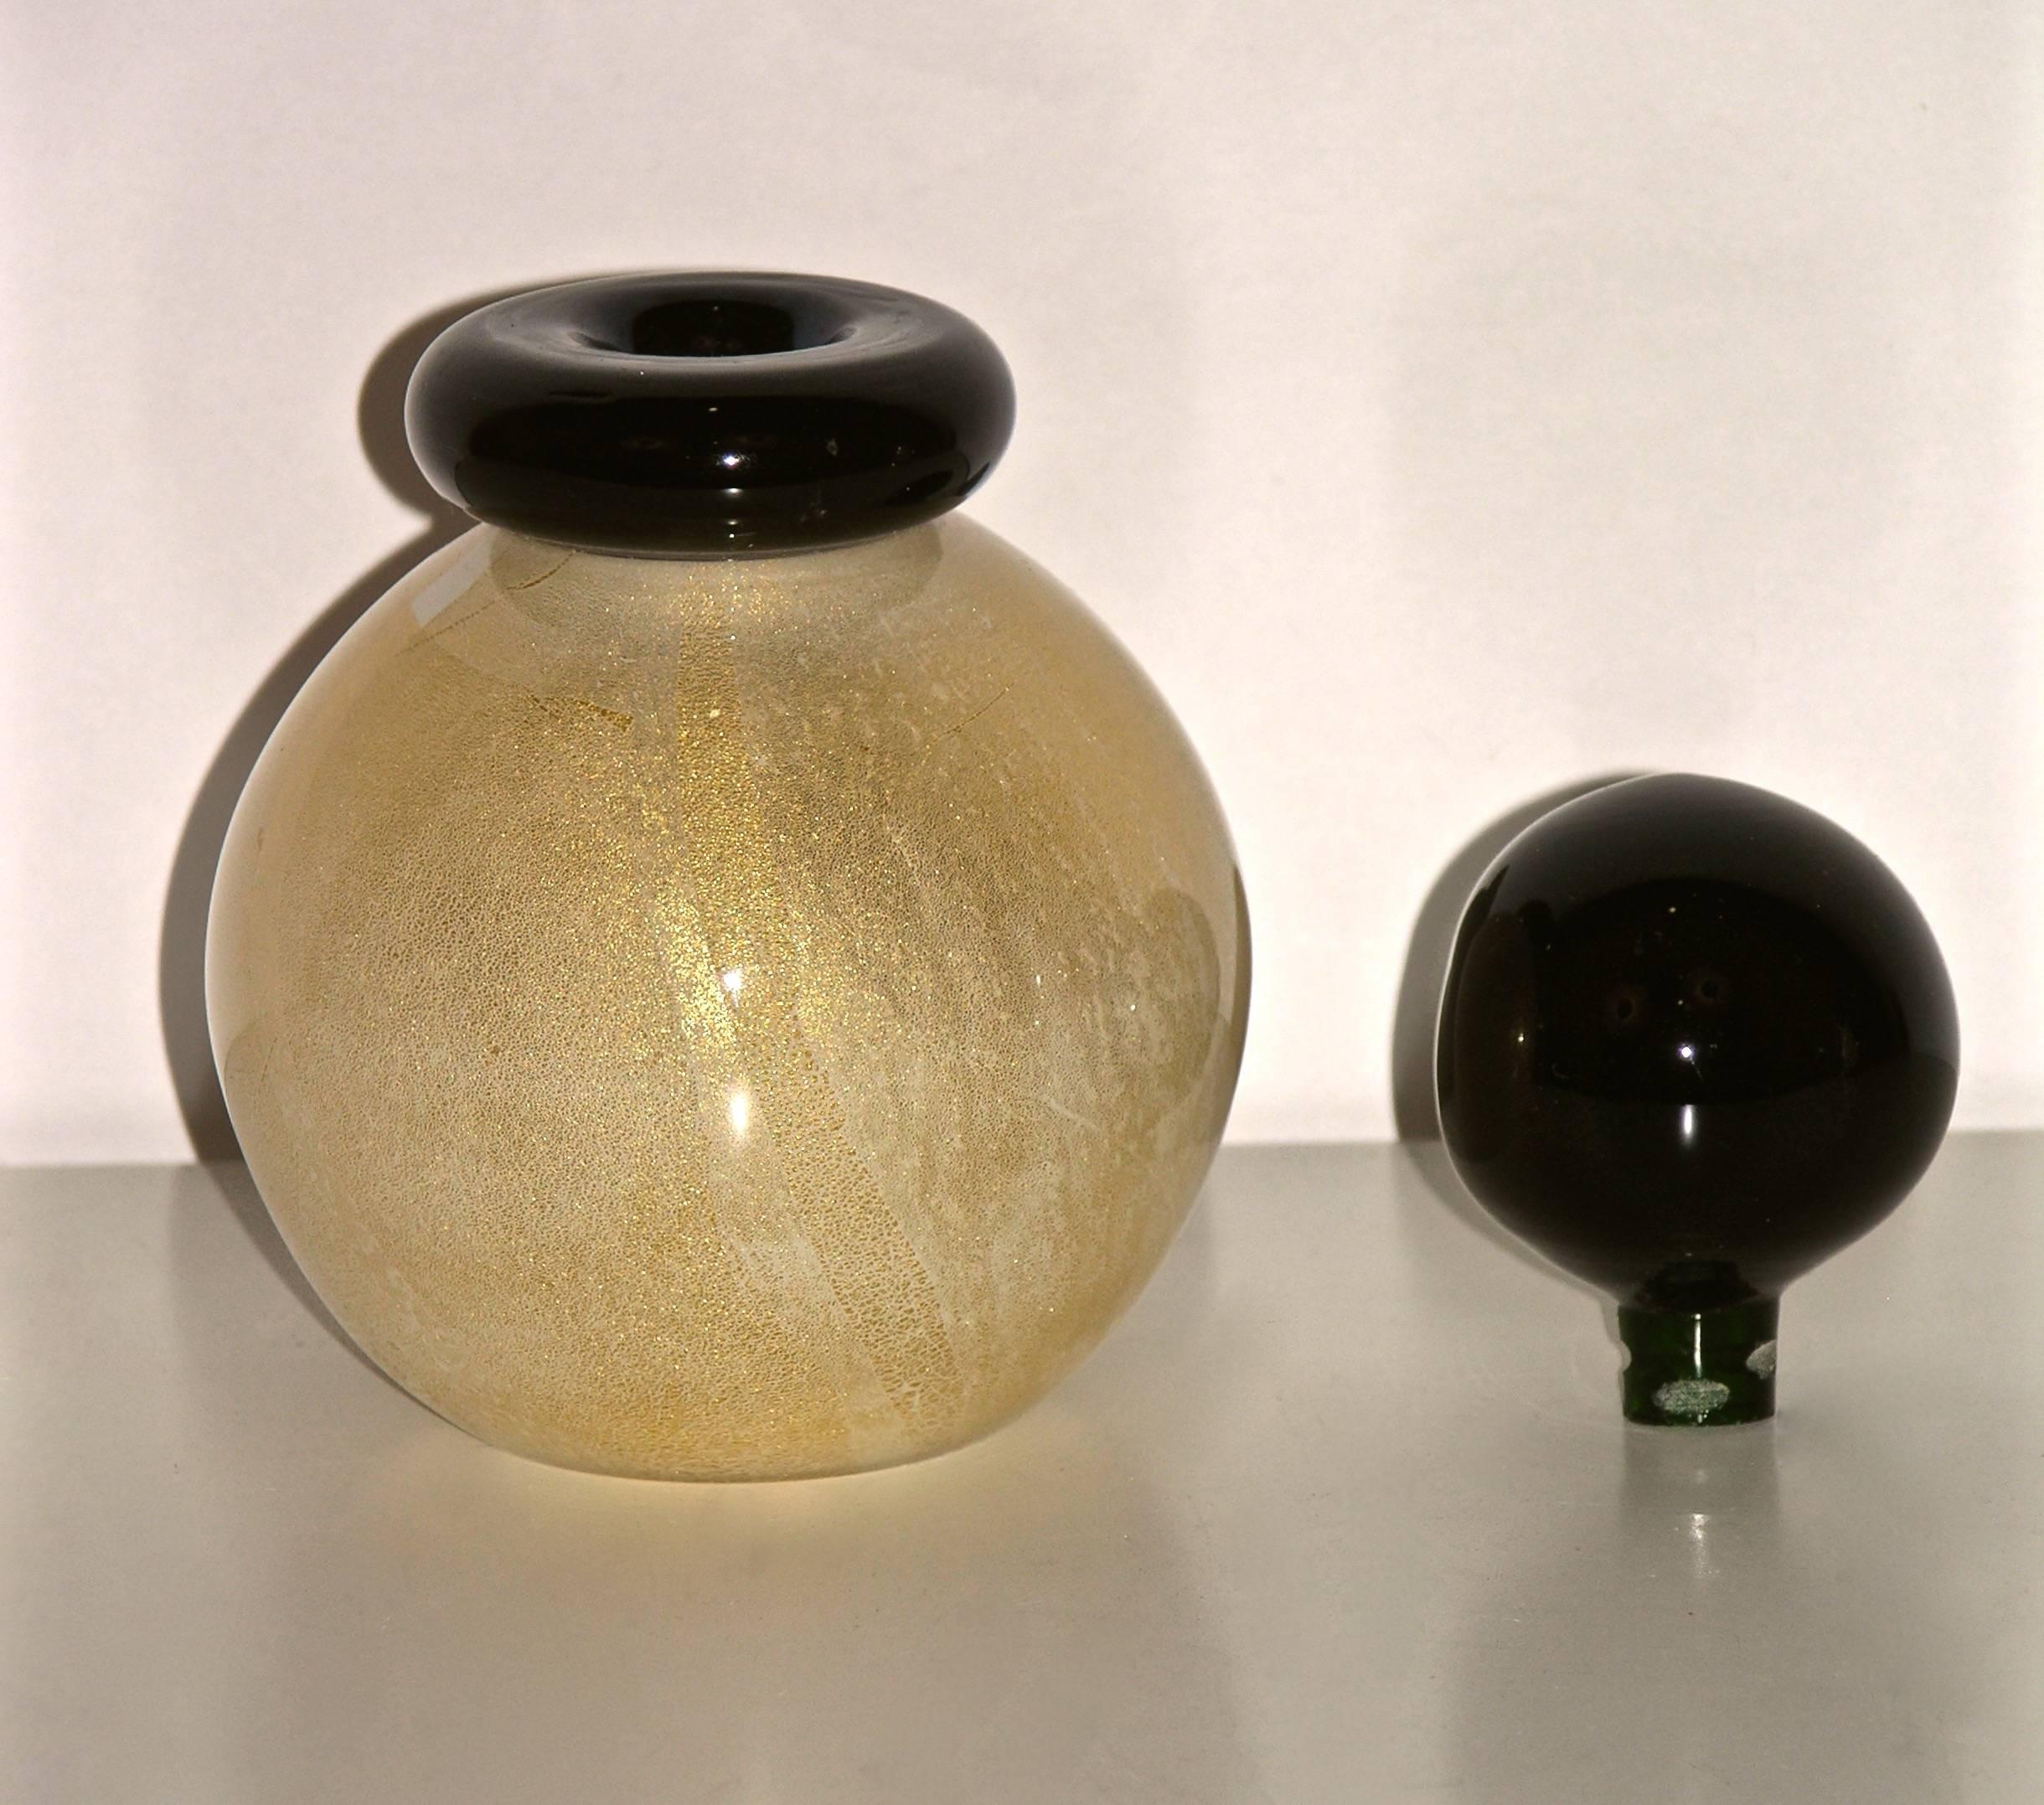 1970s Murano glass bottle by Archimede Seguso, signed. The round body is worked with pure gold leaf in the overlaid glass, cleverly accented by a lipped neck in bottle green glass accompanied by its original stopper in the same bottle green color.